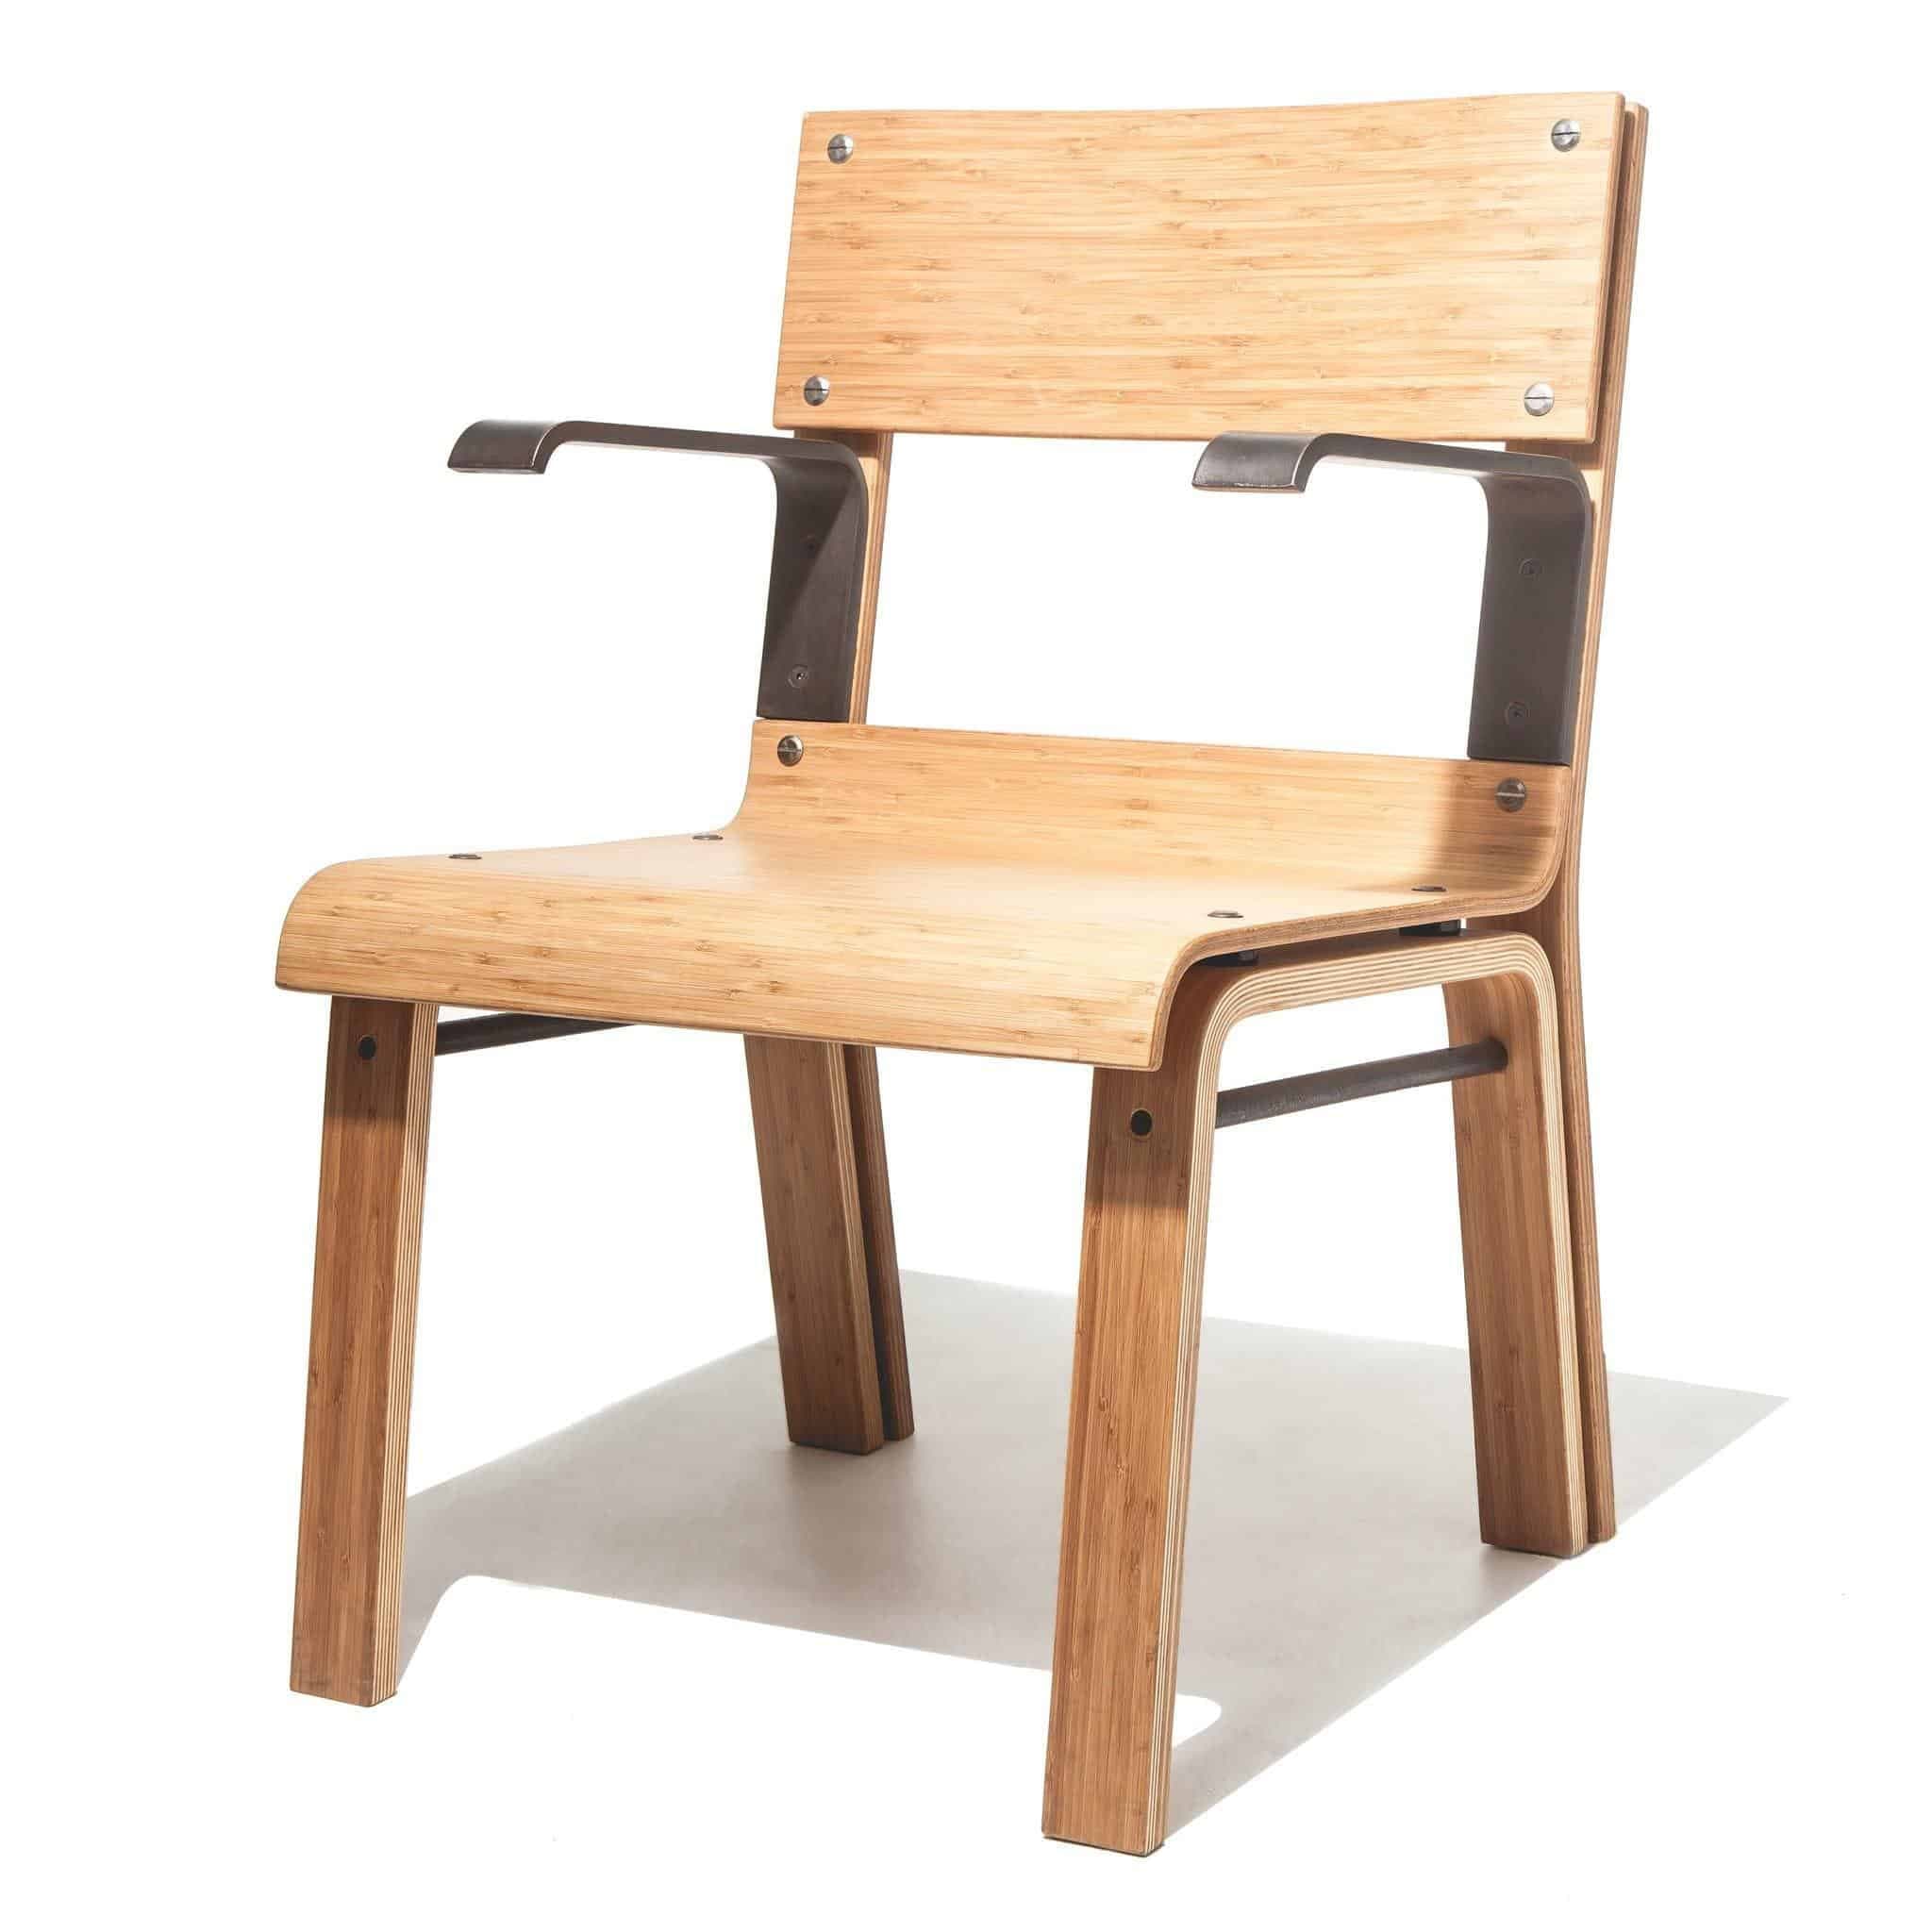 https://cdn.shopify.com/s/files/1/1413/7056/products/Bent-Laminated-Bamboo-End-Chair-e1d.jpg?v=1656452446